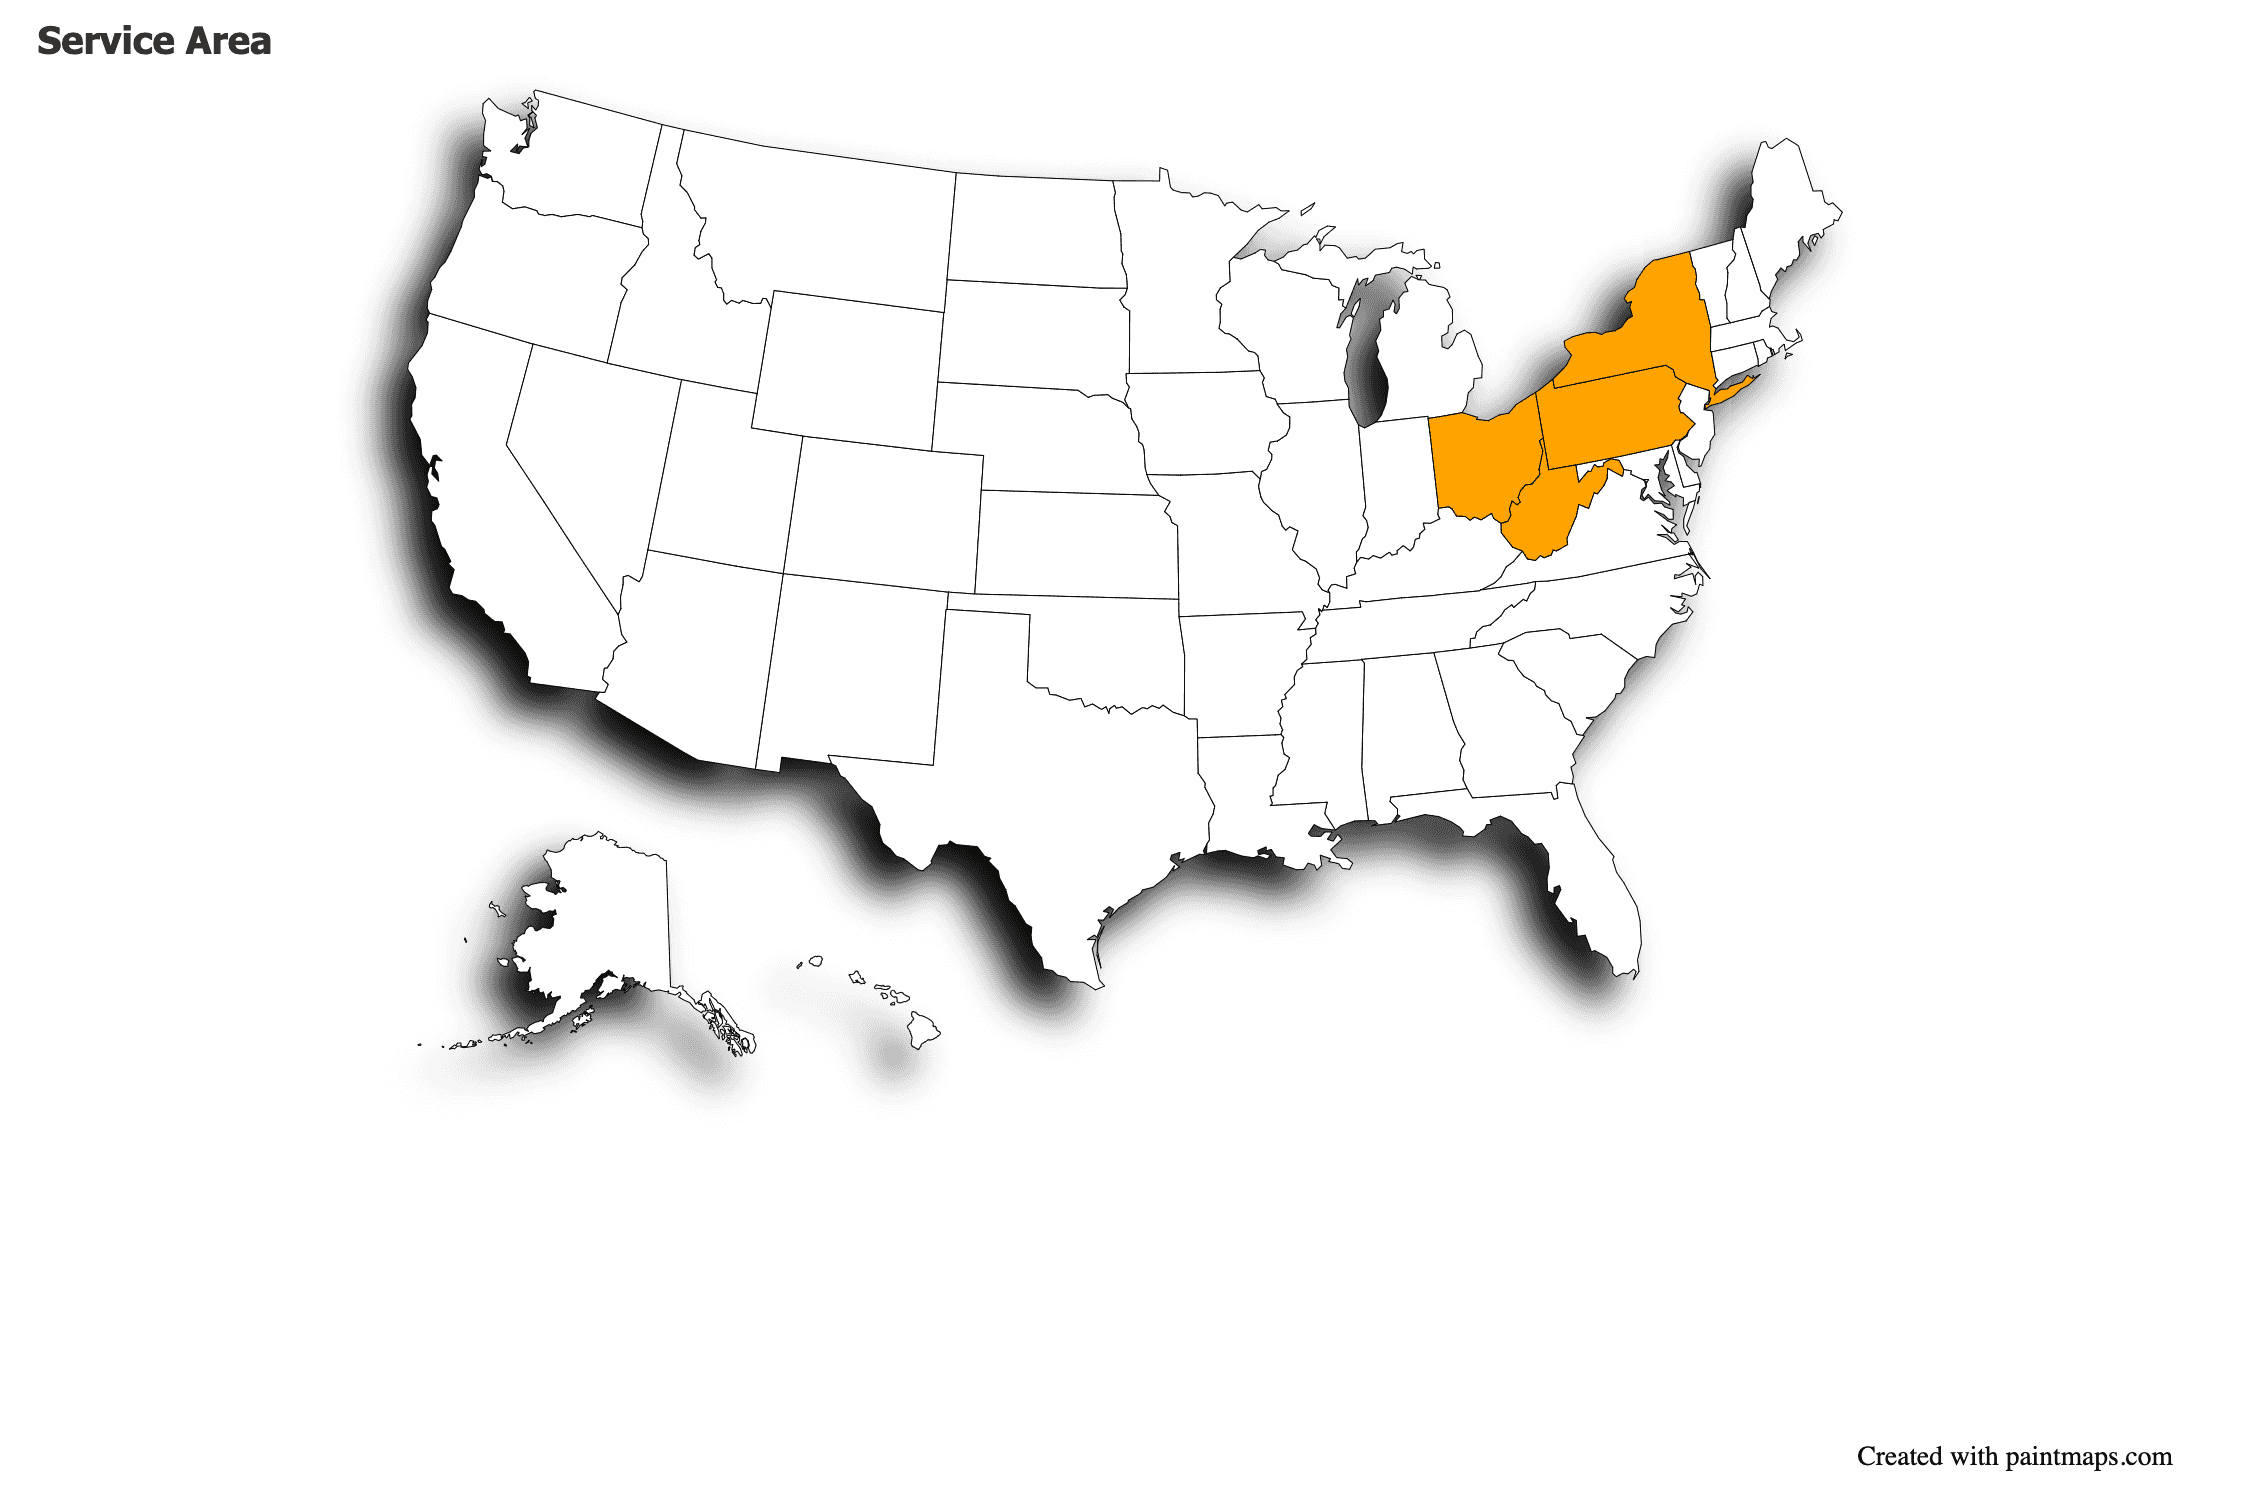 Map of United States with highlighted service area of Pennsylvania, New York, Ohio, and West Virginia